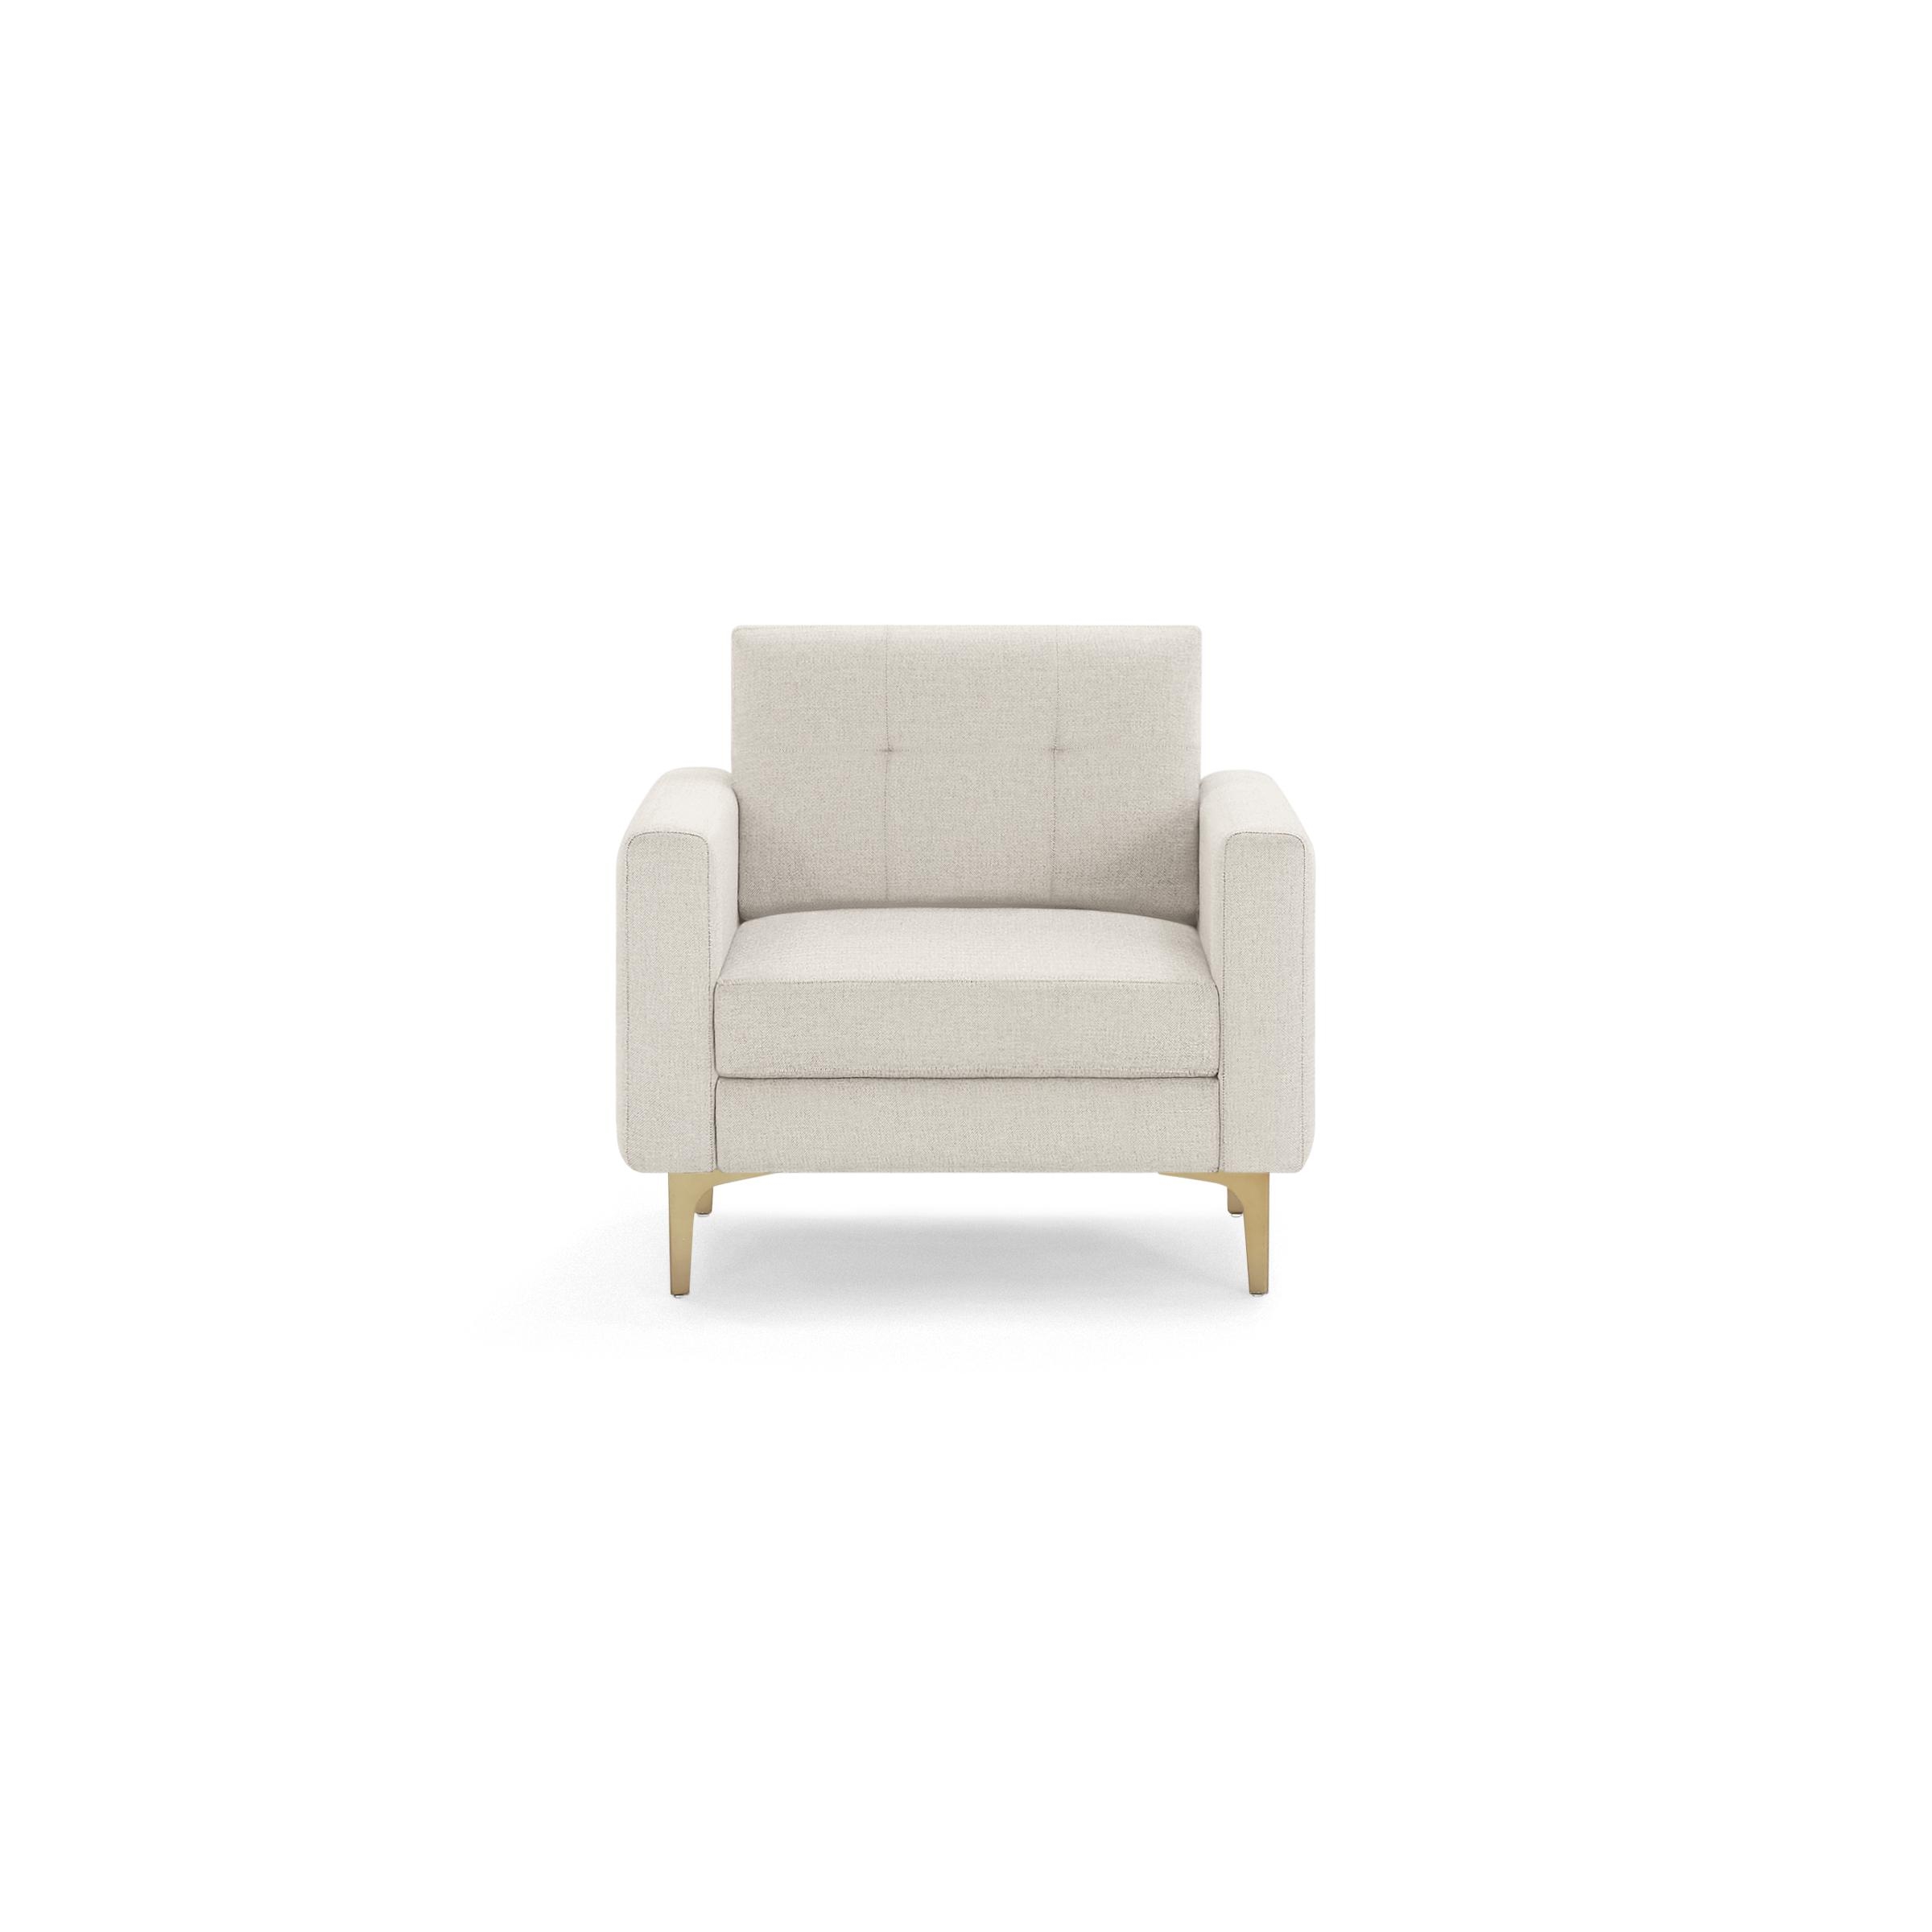 Nomad Armchair in Ivory, Brass Legs - Image 0